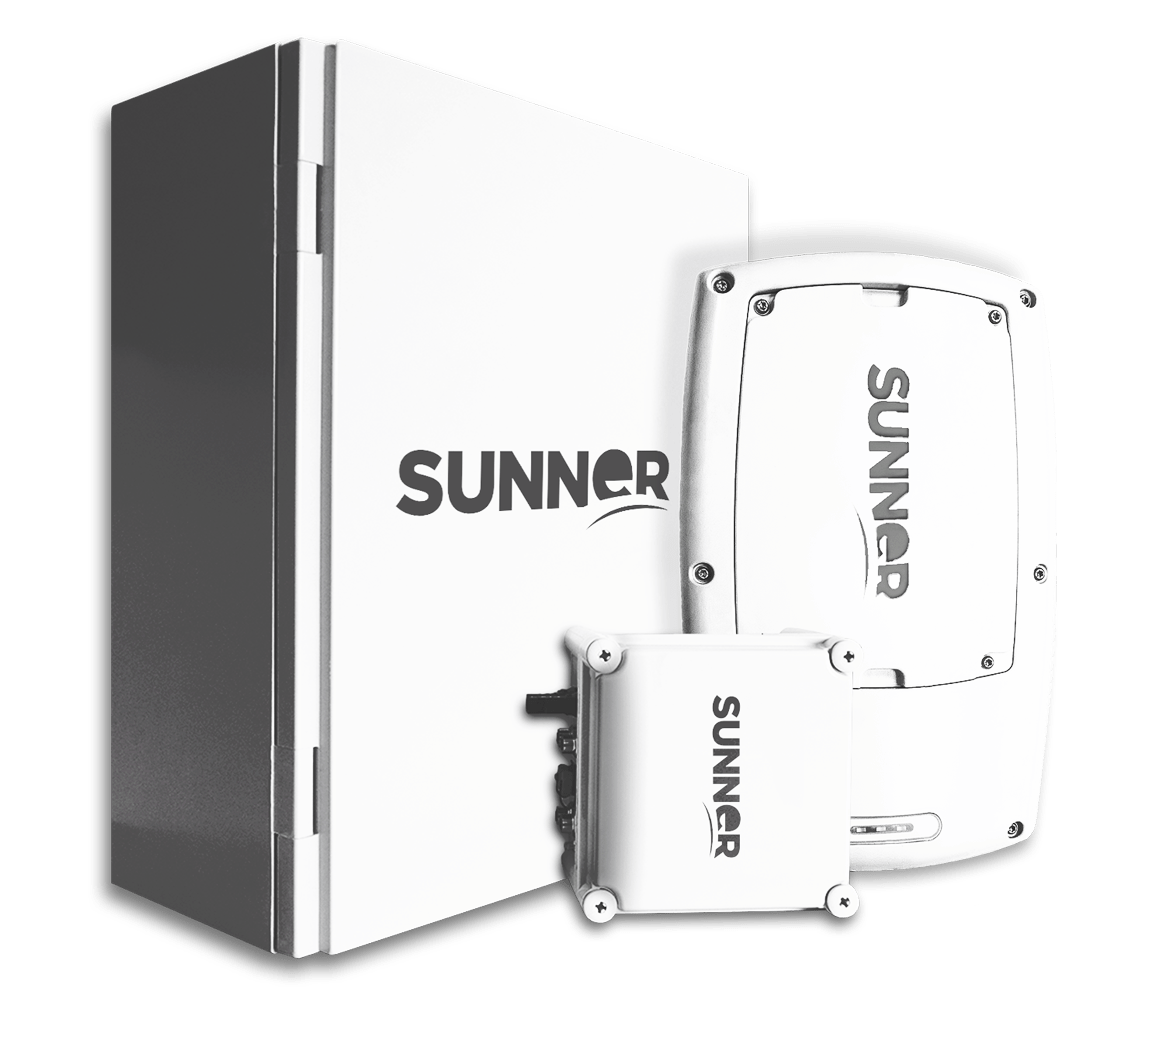 Products of Sunner